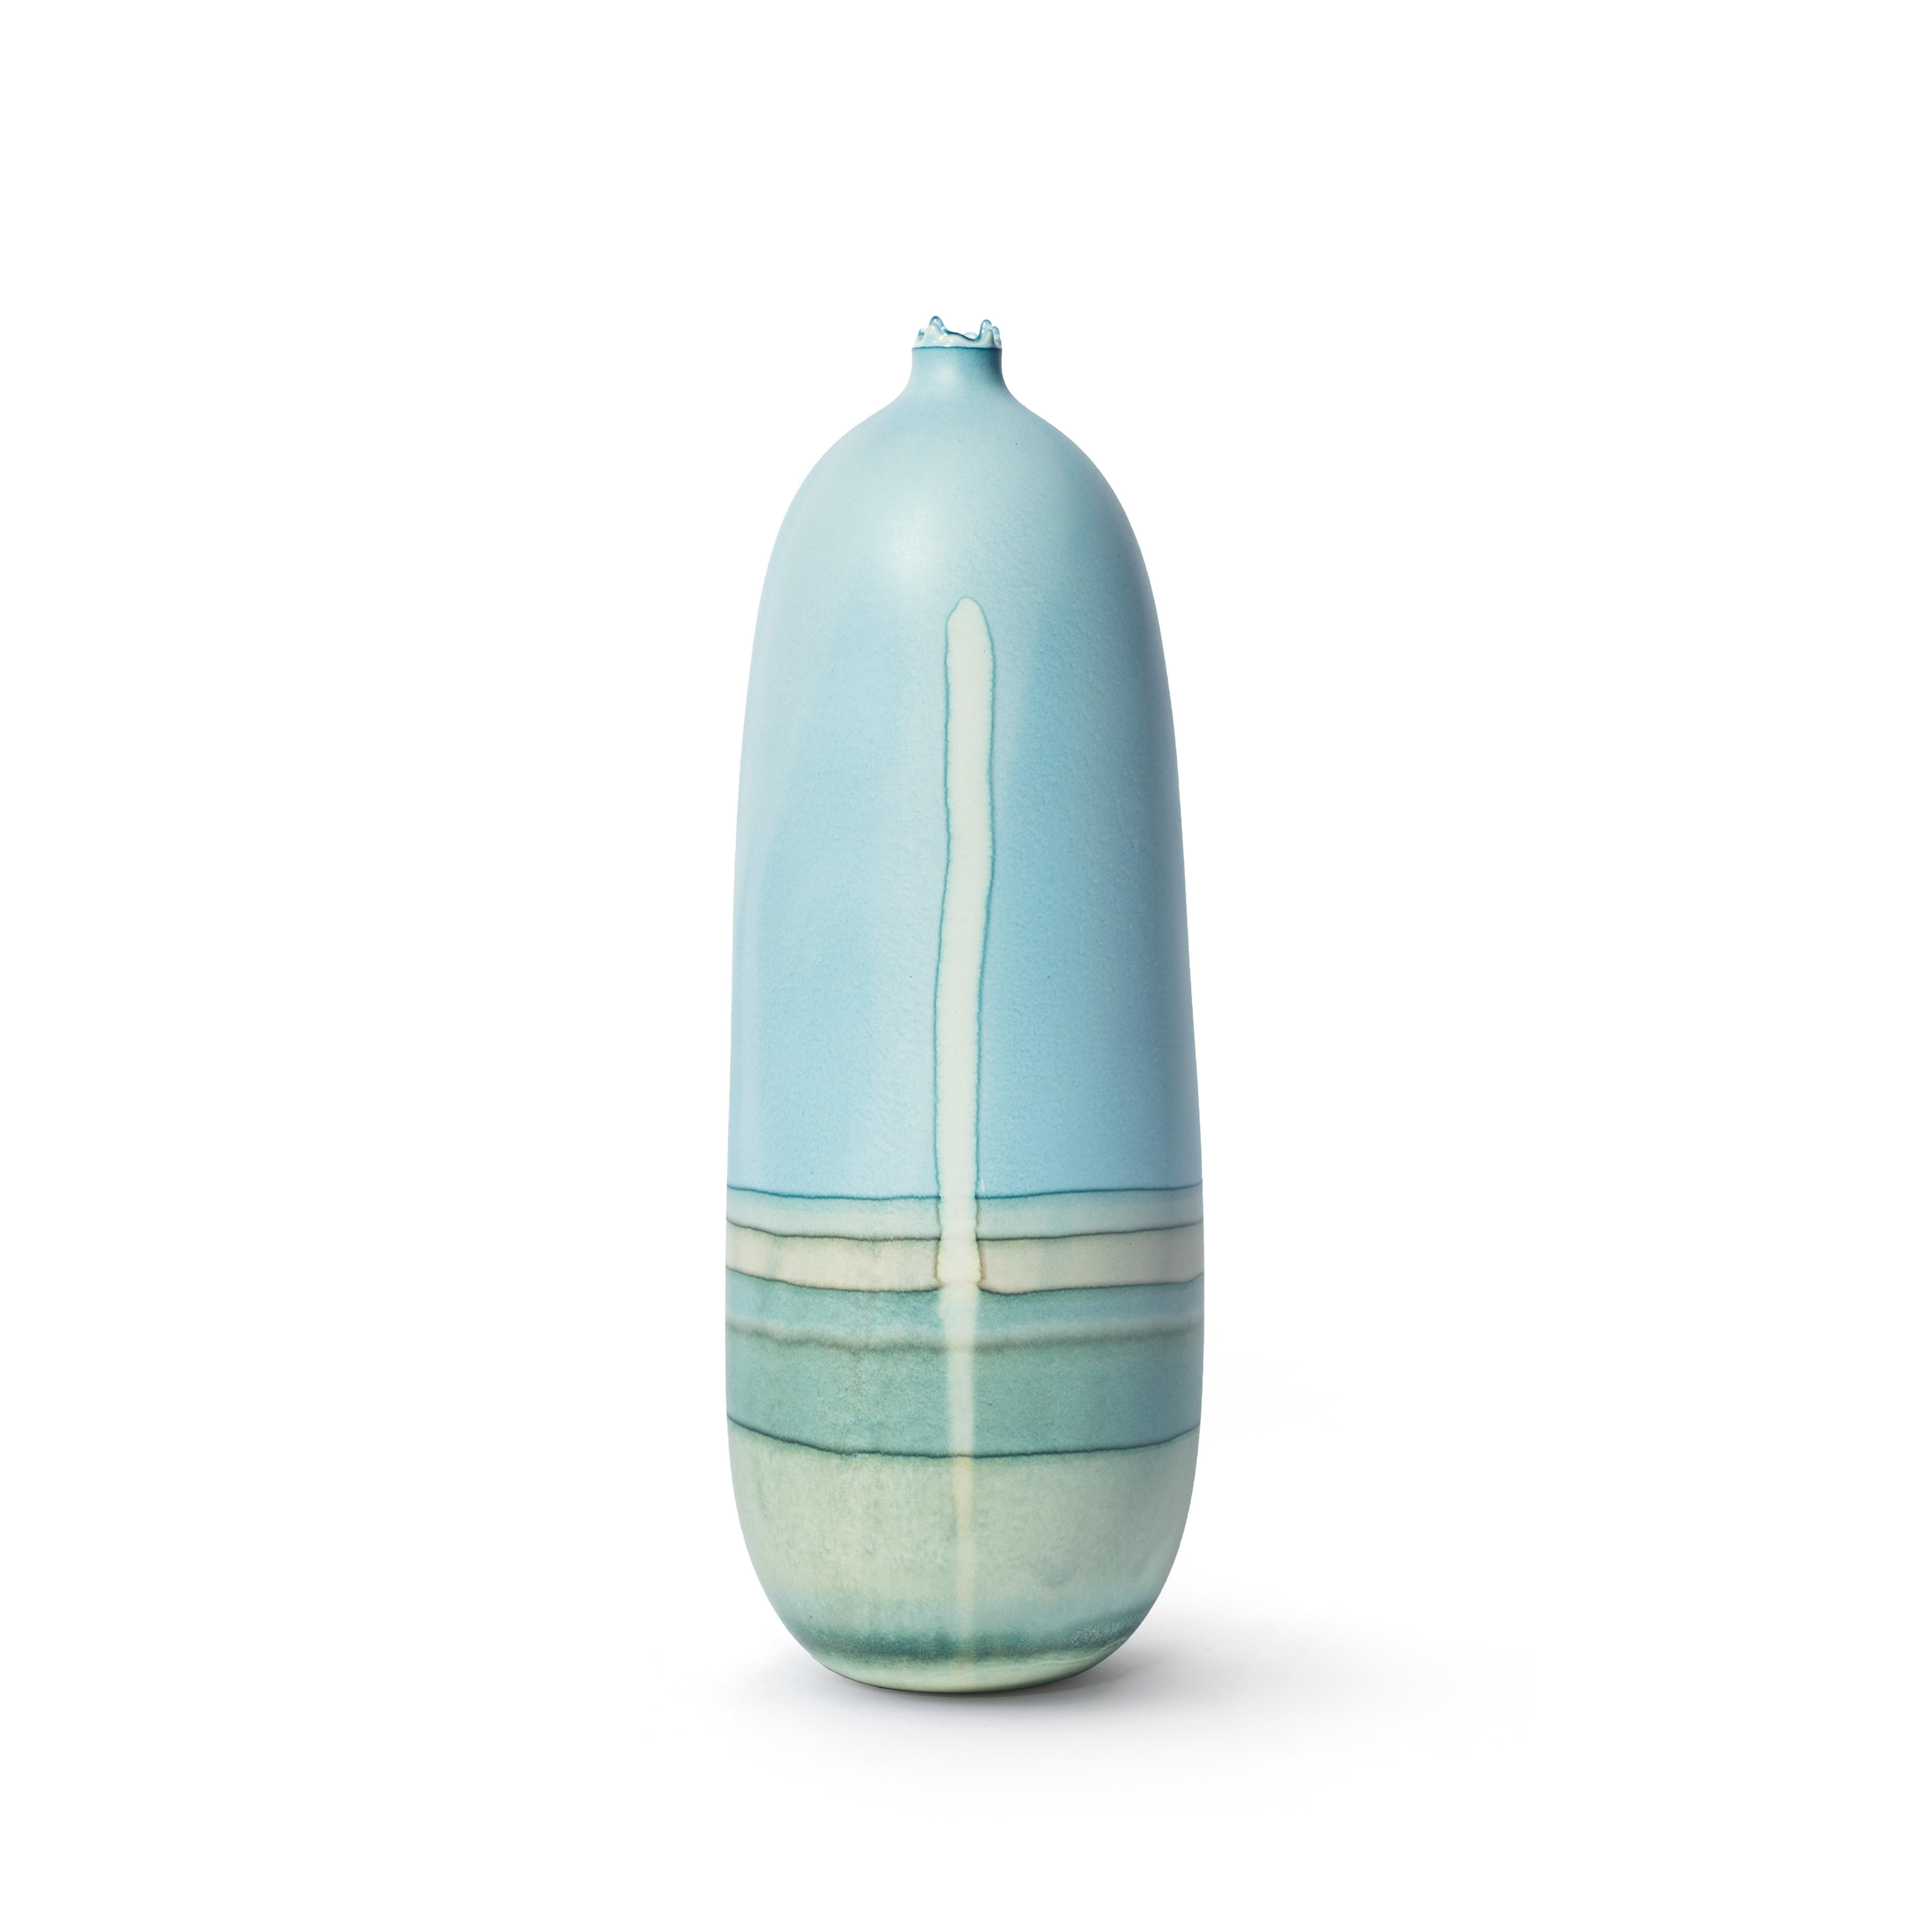 Blue and green venus vase by Elyse Graham
Dimensions: W 14 x D 14 x H 38 cm
Materials: Plaster, resin
Molded, dyed, and finished by Hand in LA. Customization
Available.
All pieces are made to order

This collection of vessels is inspired by